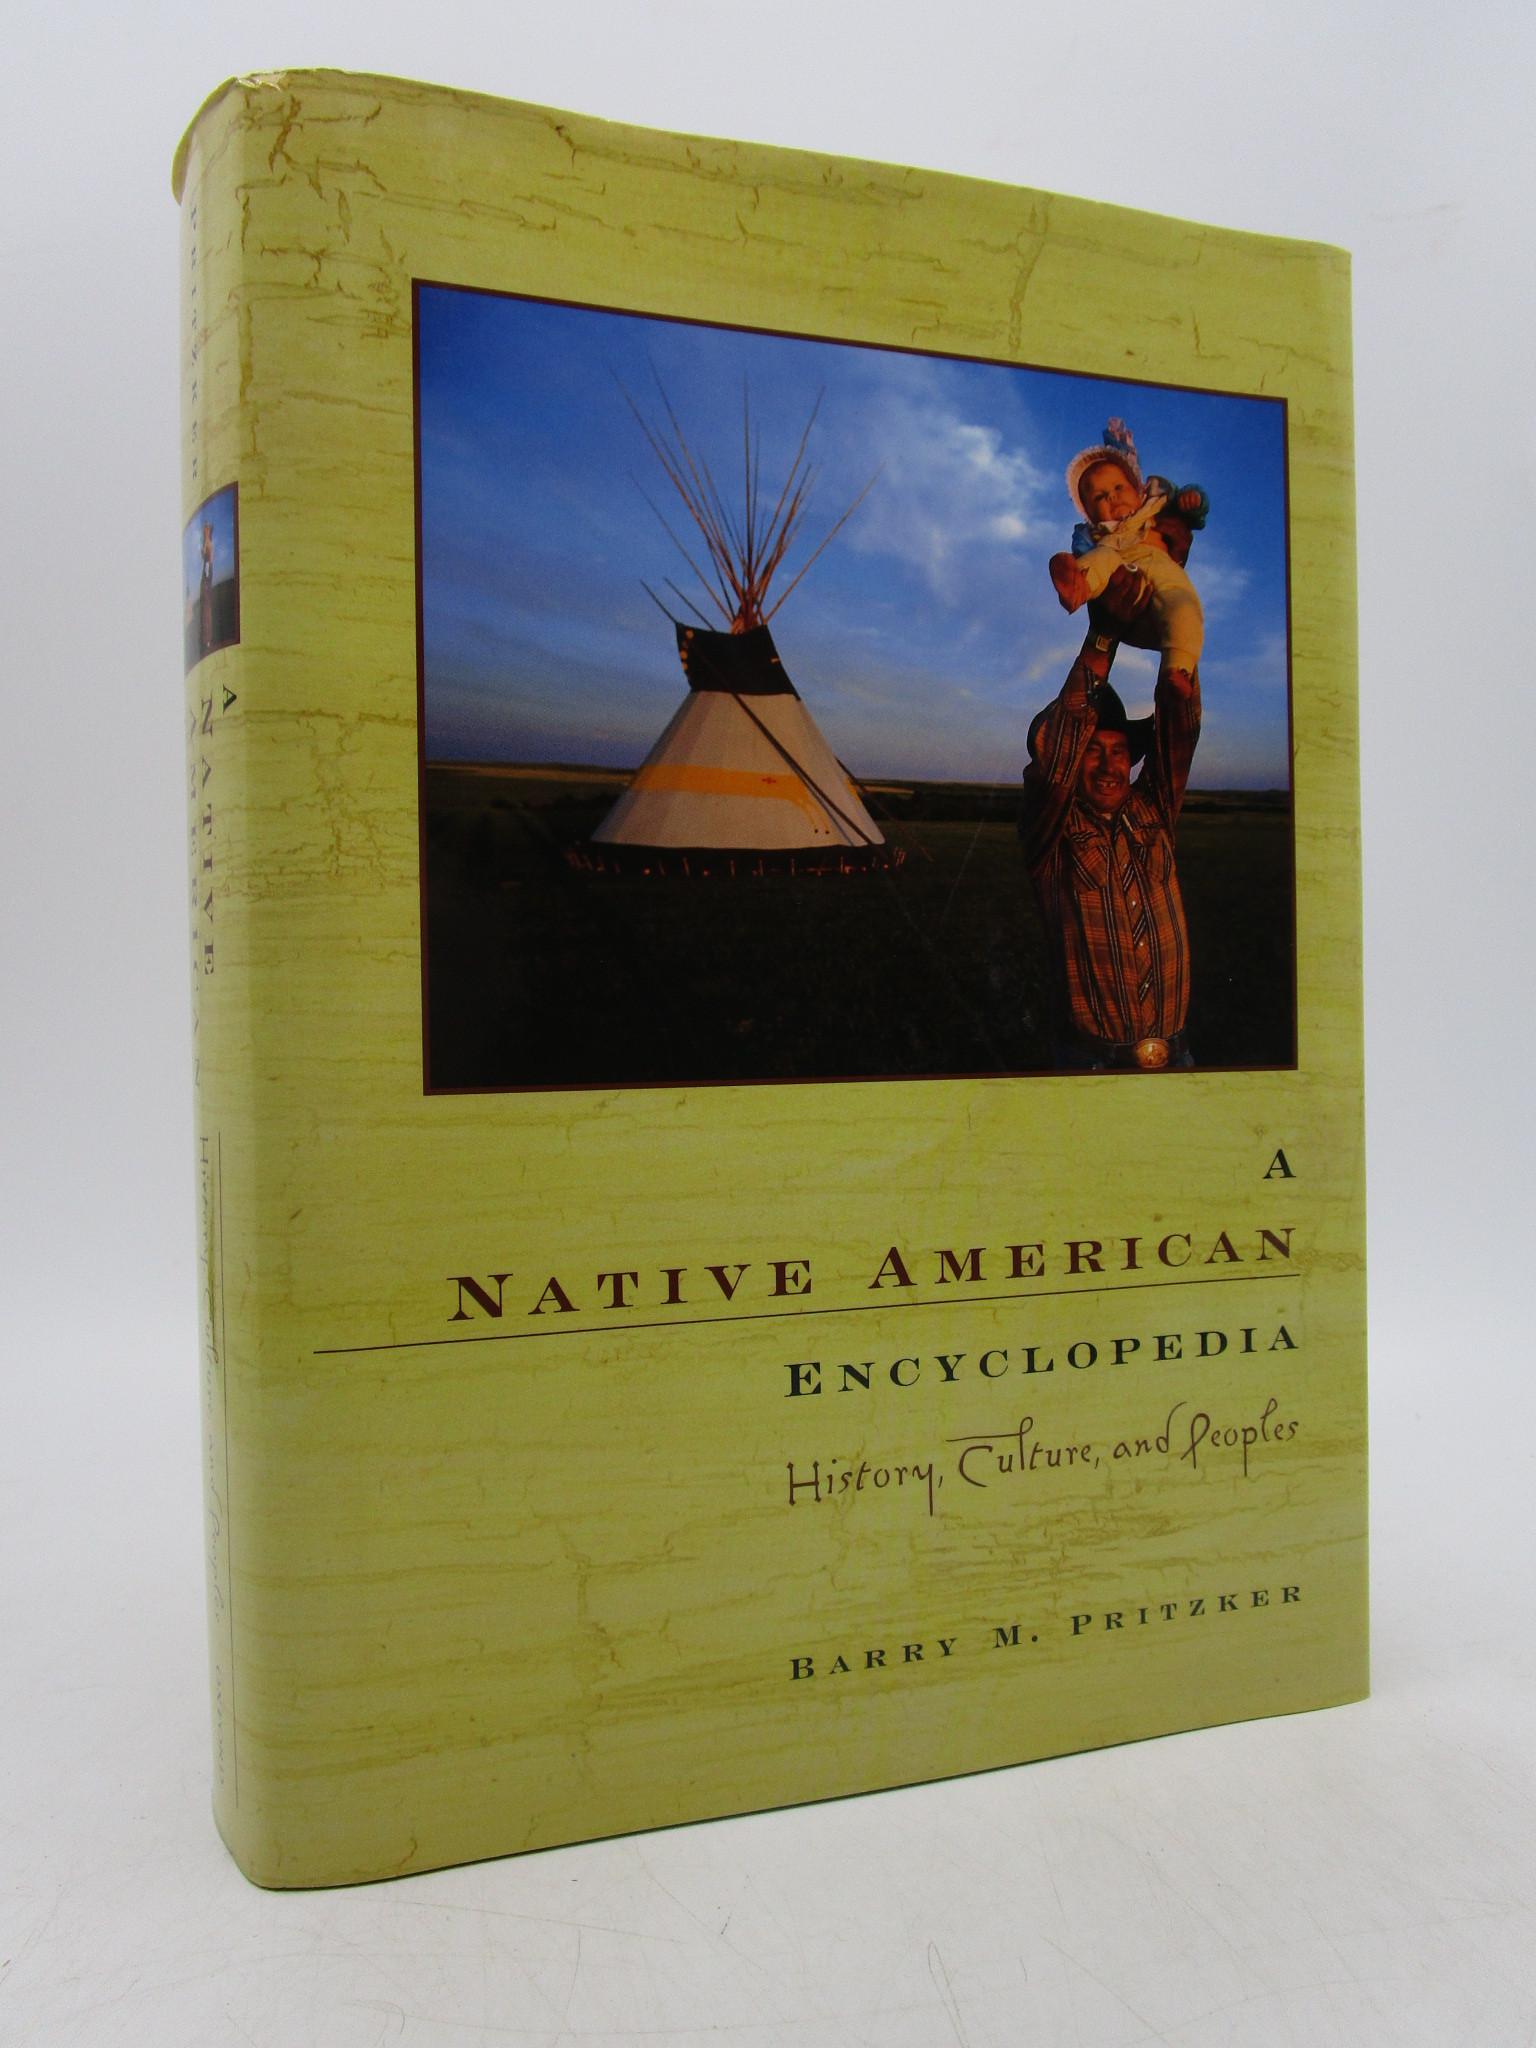 A Native American Encyclopedia: History, Culture, and Peoples - Barry M. Pritzker